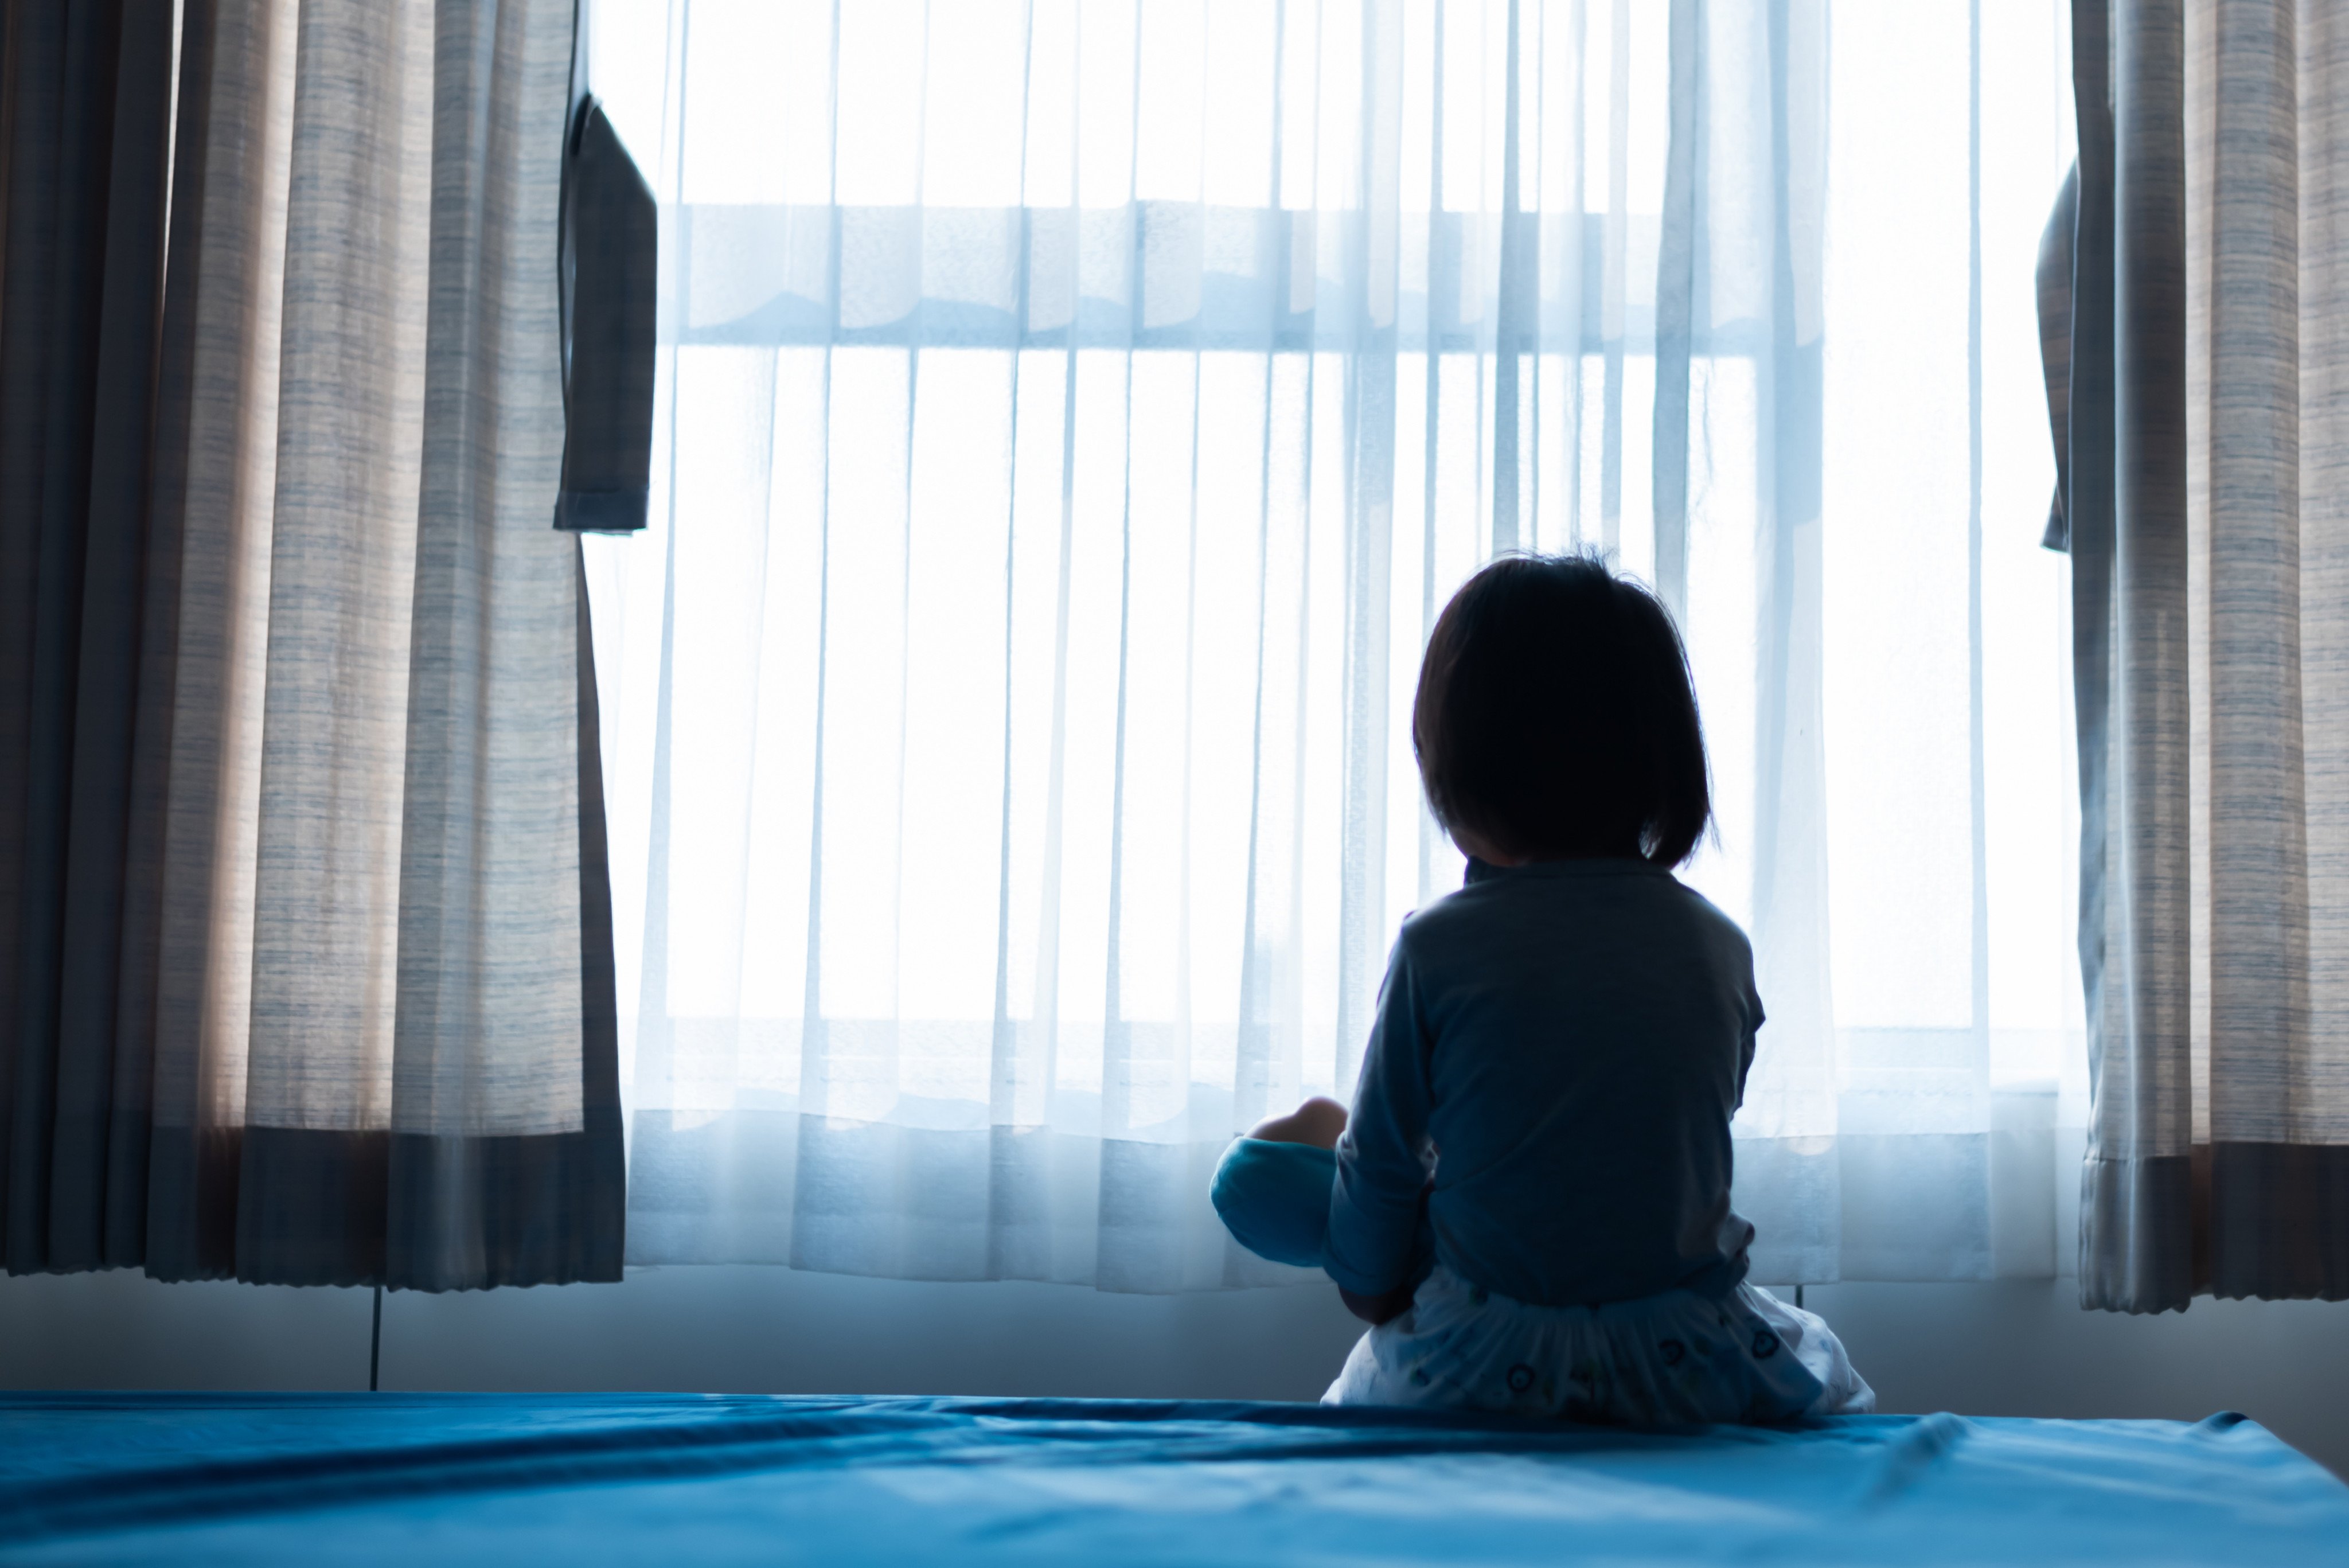 Lawmakers fear some professions may escape prosecution for failure to report suspected child abuse. Photo: Shutterstock